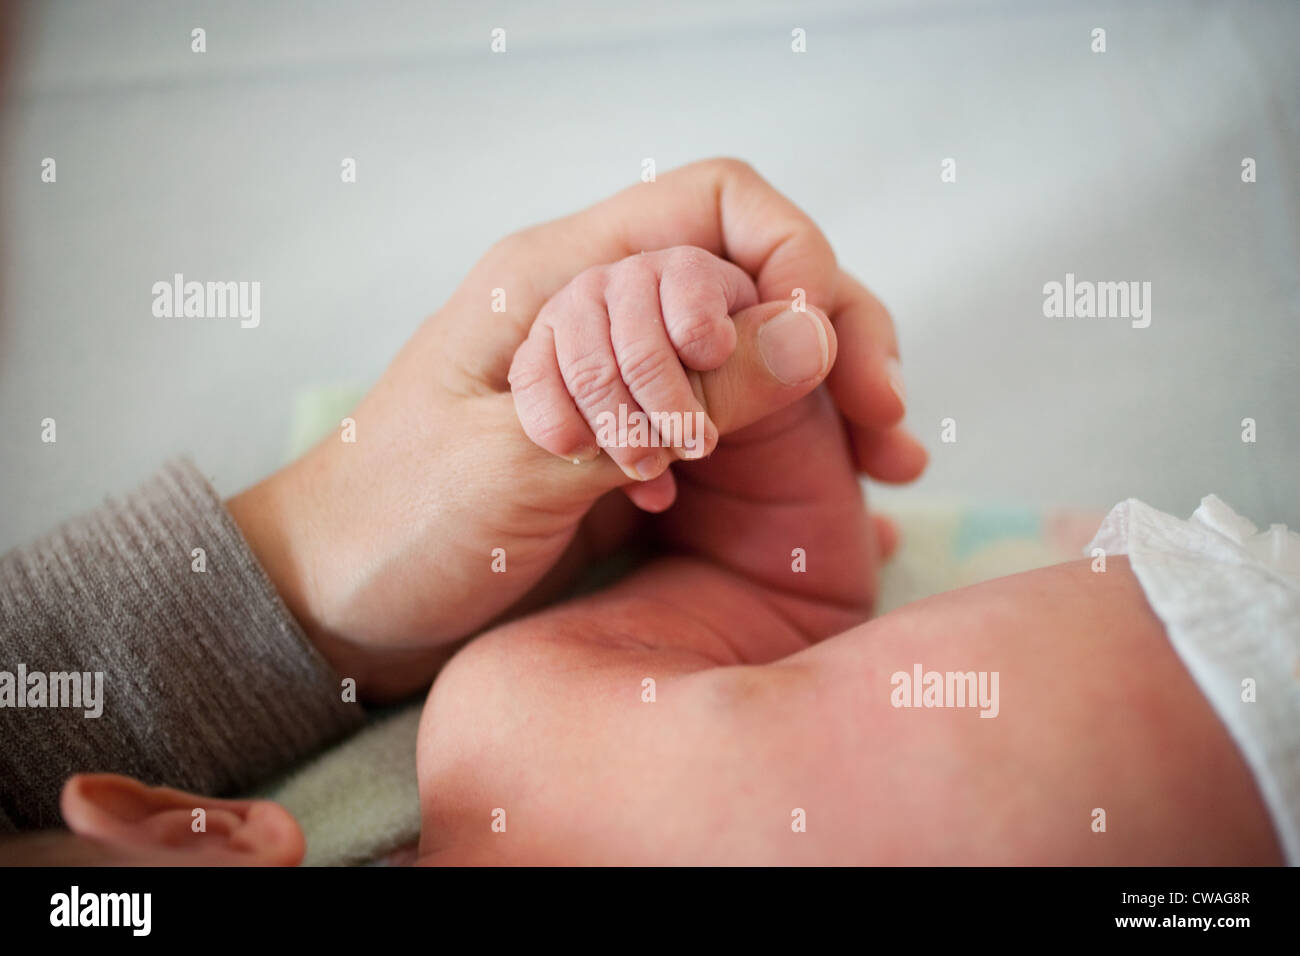 Mother holding newborn baby's hand Banque D'Images